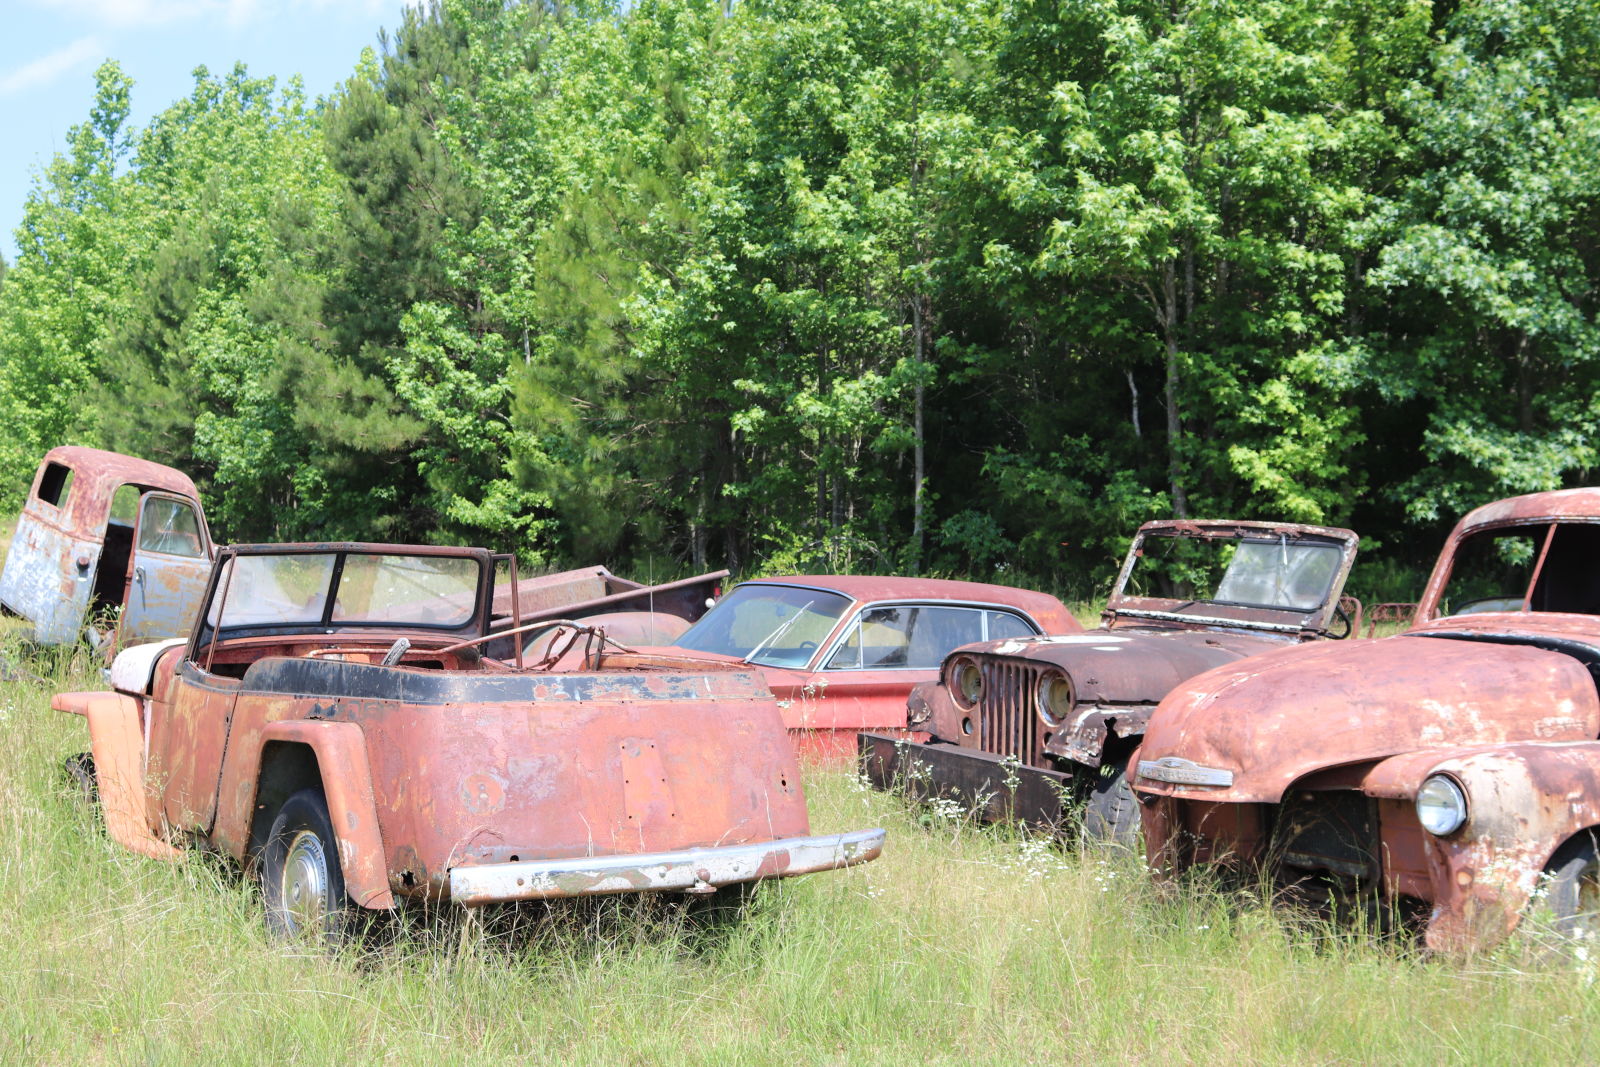 I found a nice hoard of old cars resting in a field. among them a Jeep Jeeepster, and old CJ.